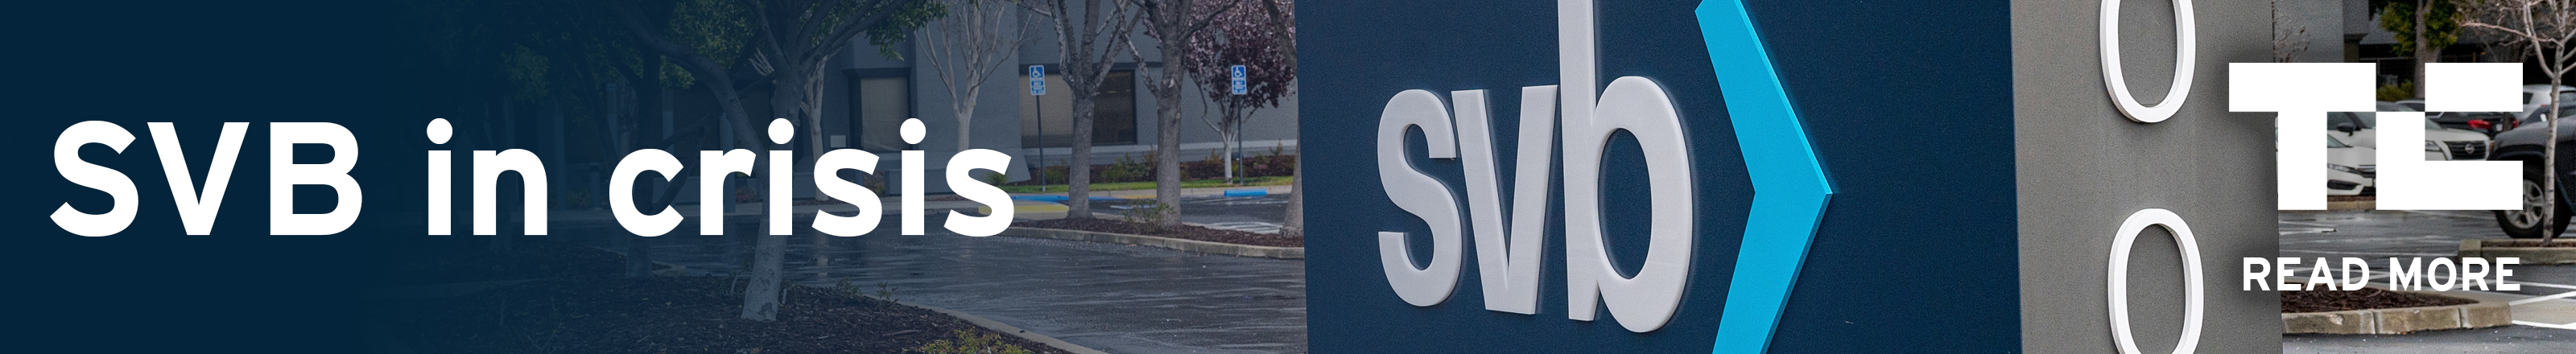 Learn more about SVB's 2023 collapse on TechCrunch